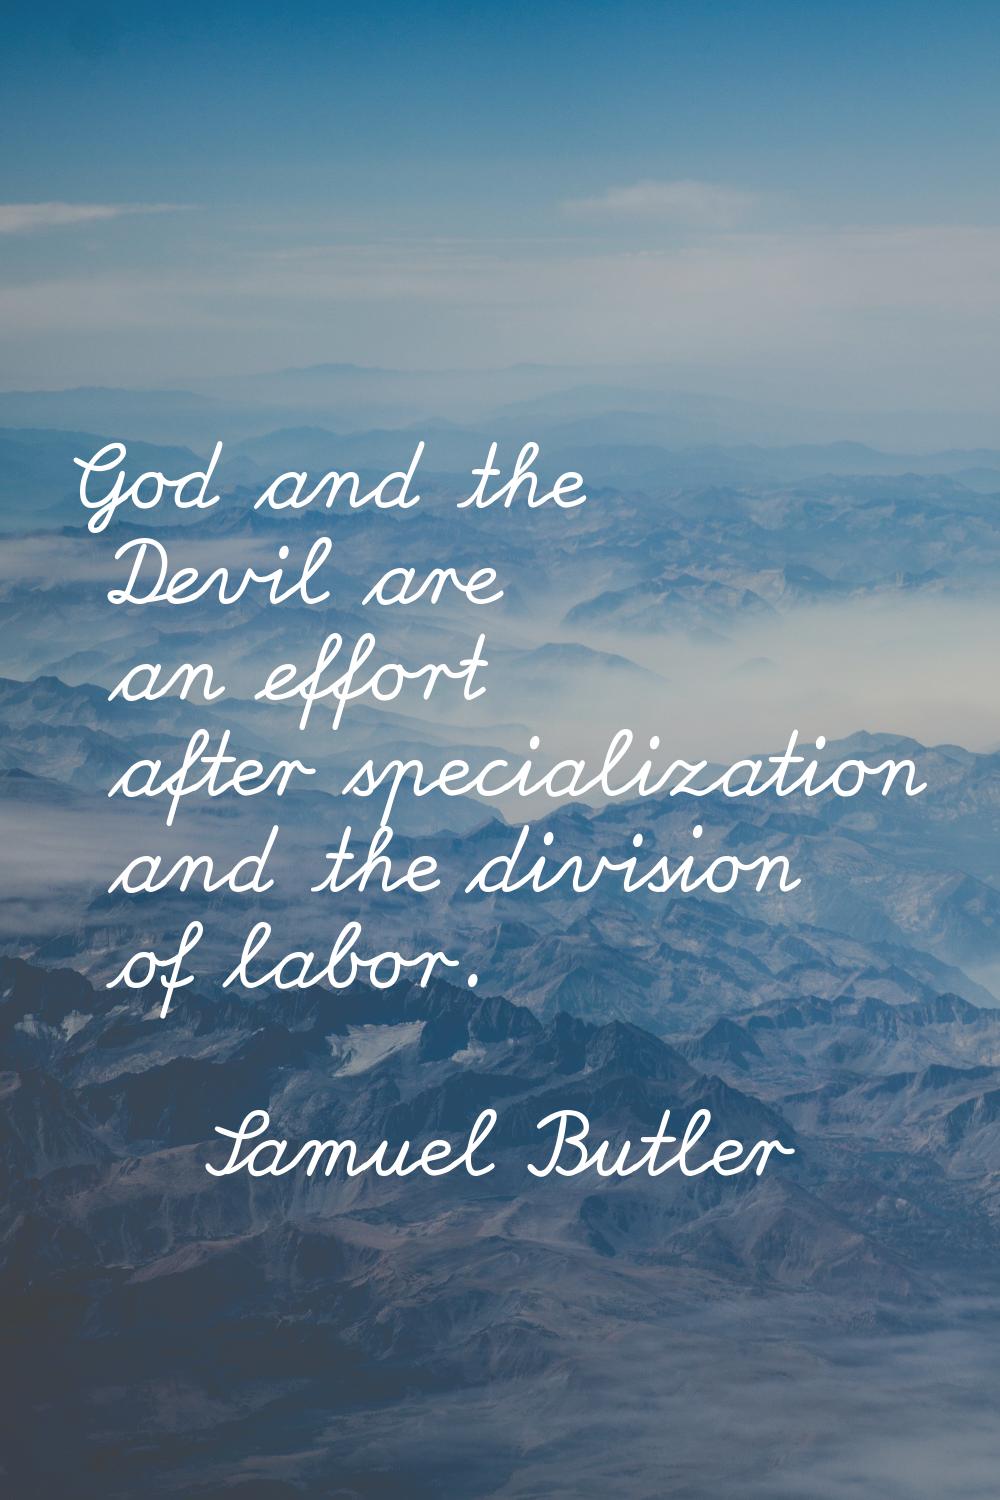 God and the Devil are an effort after specialization and the division of labor.